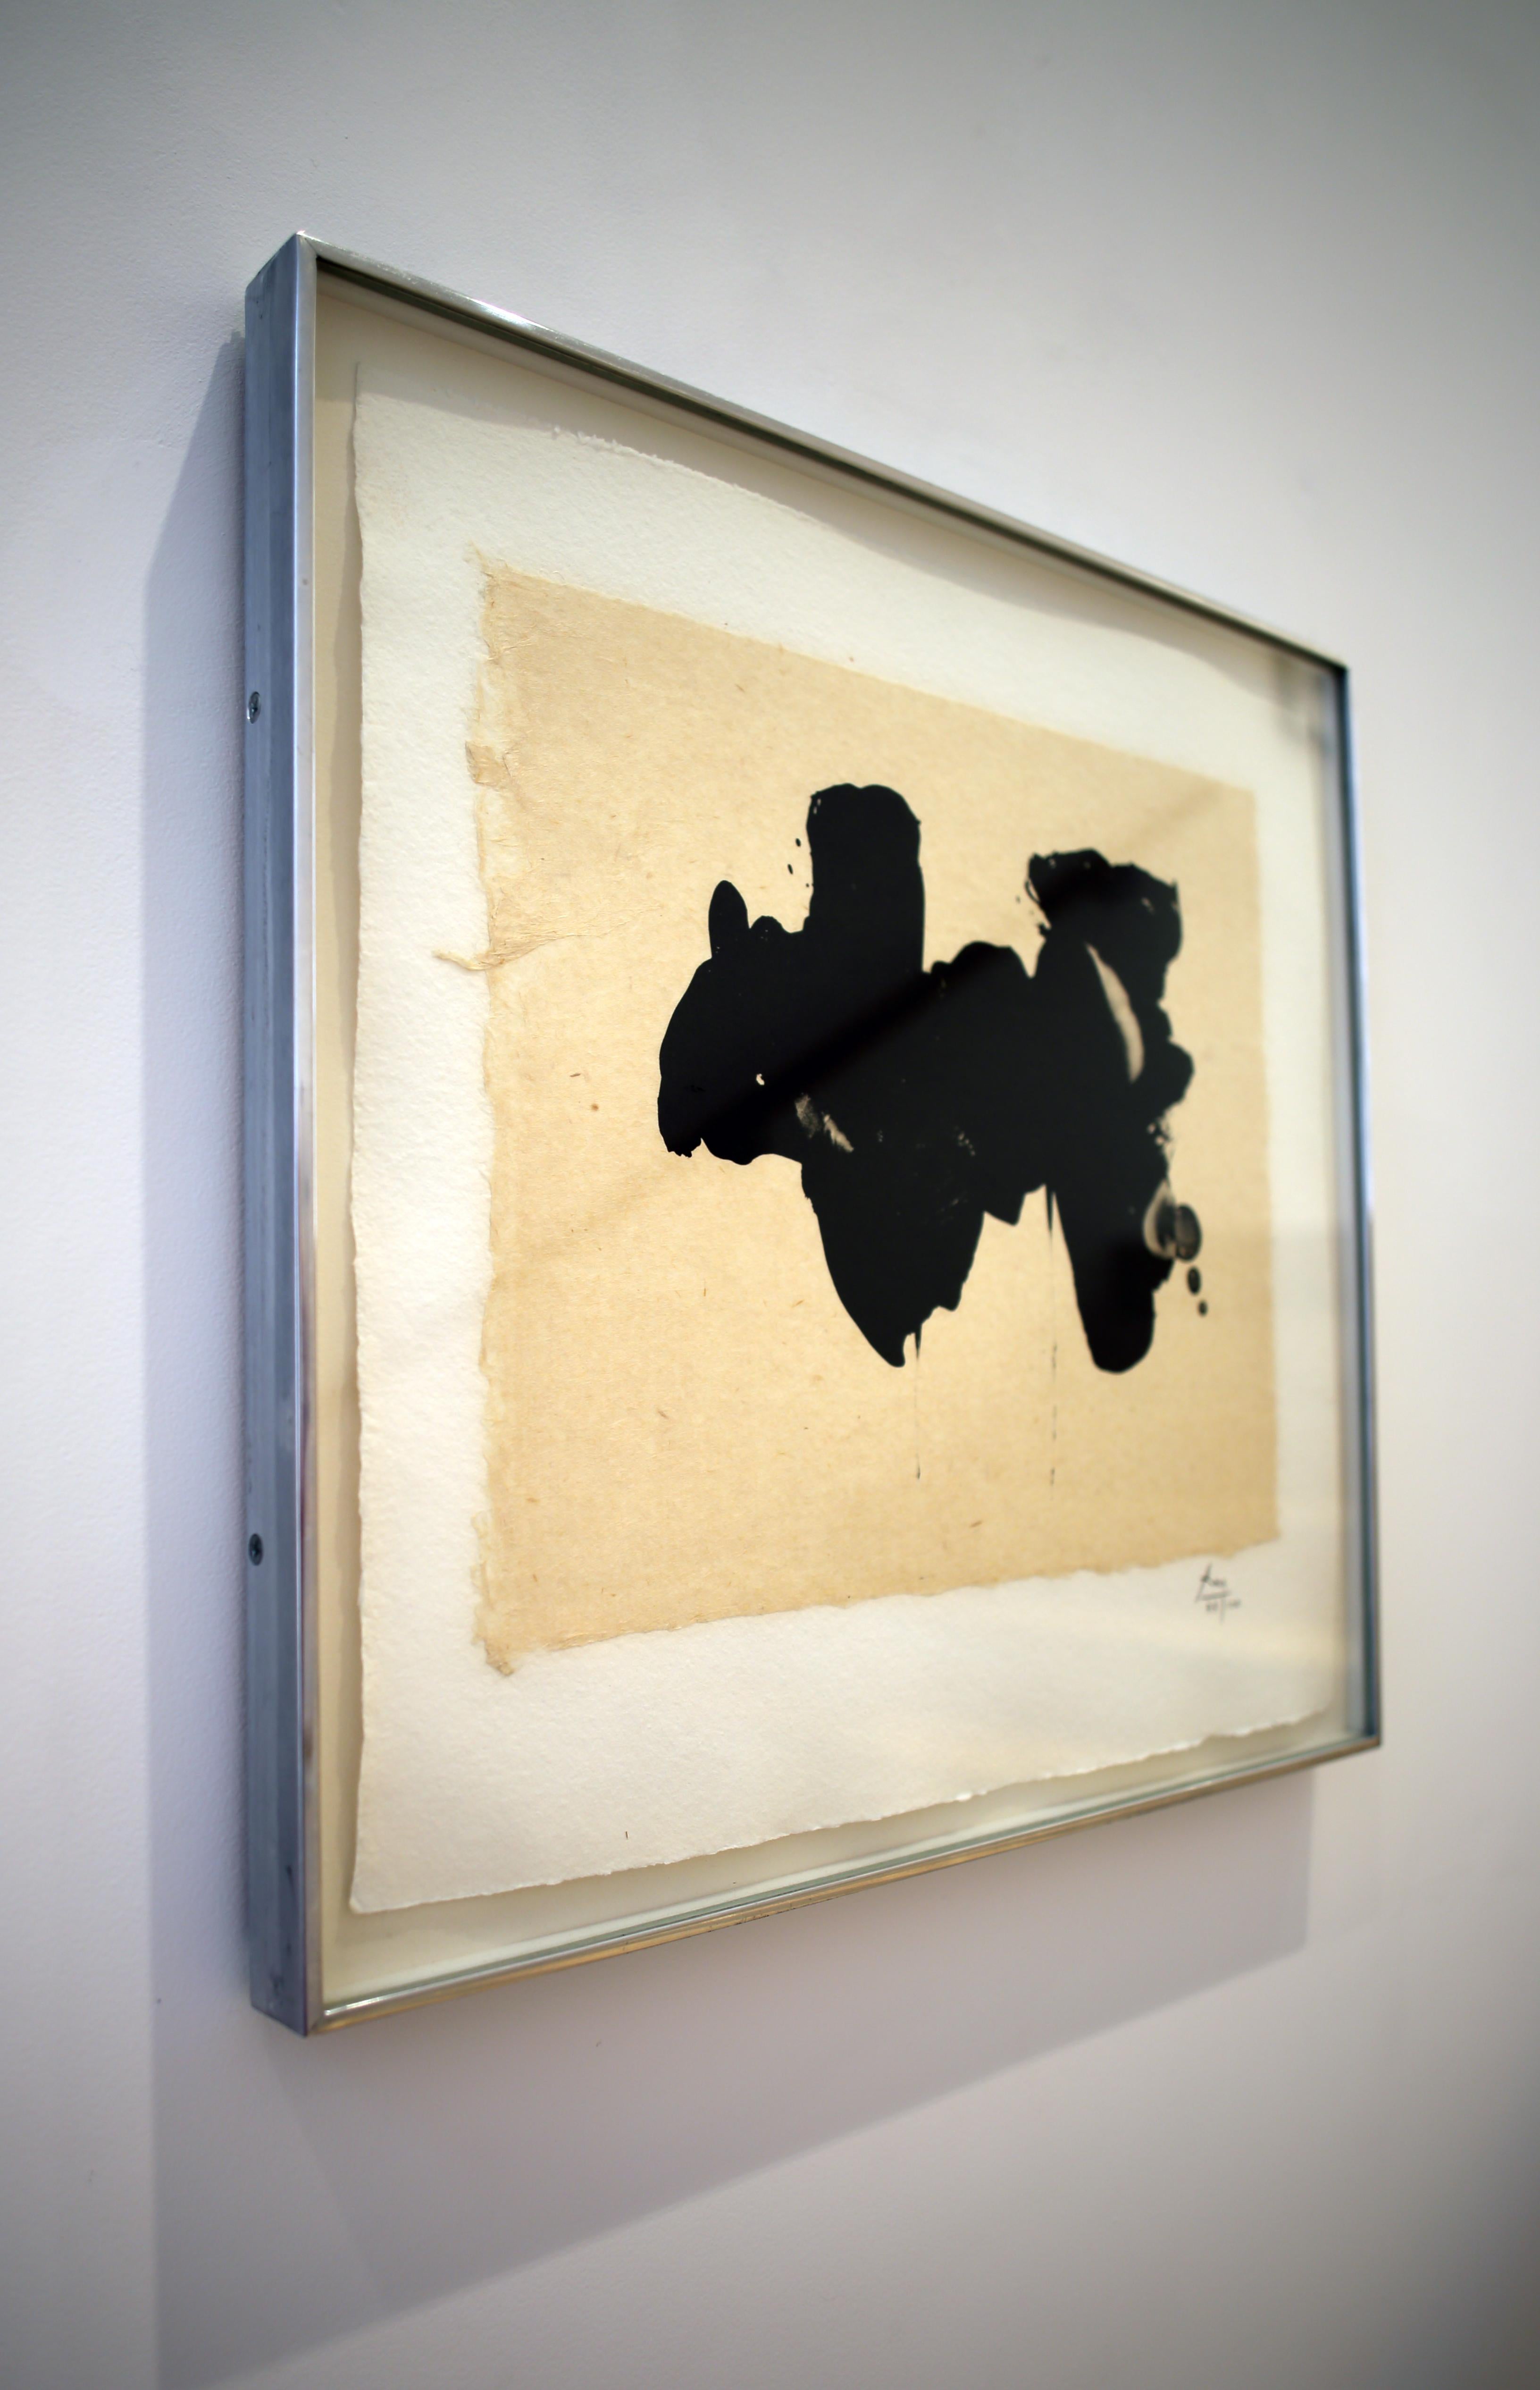 Alberti Elegy - Abstract Expressionist Print by Robert Motherwell